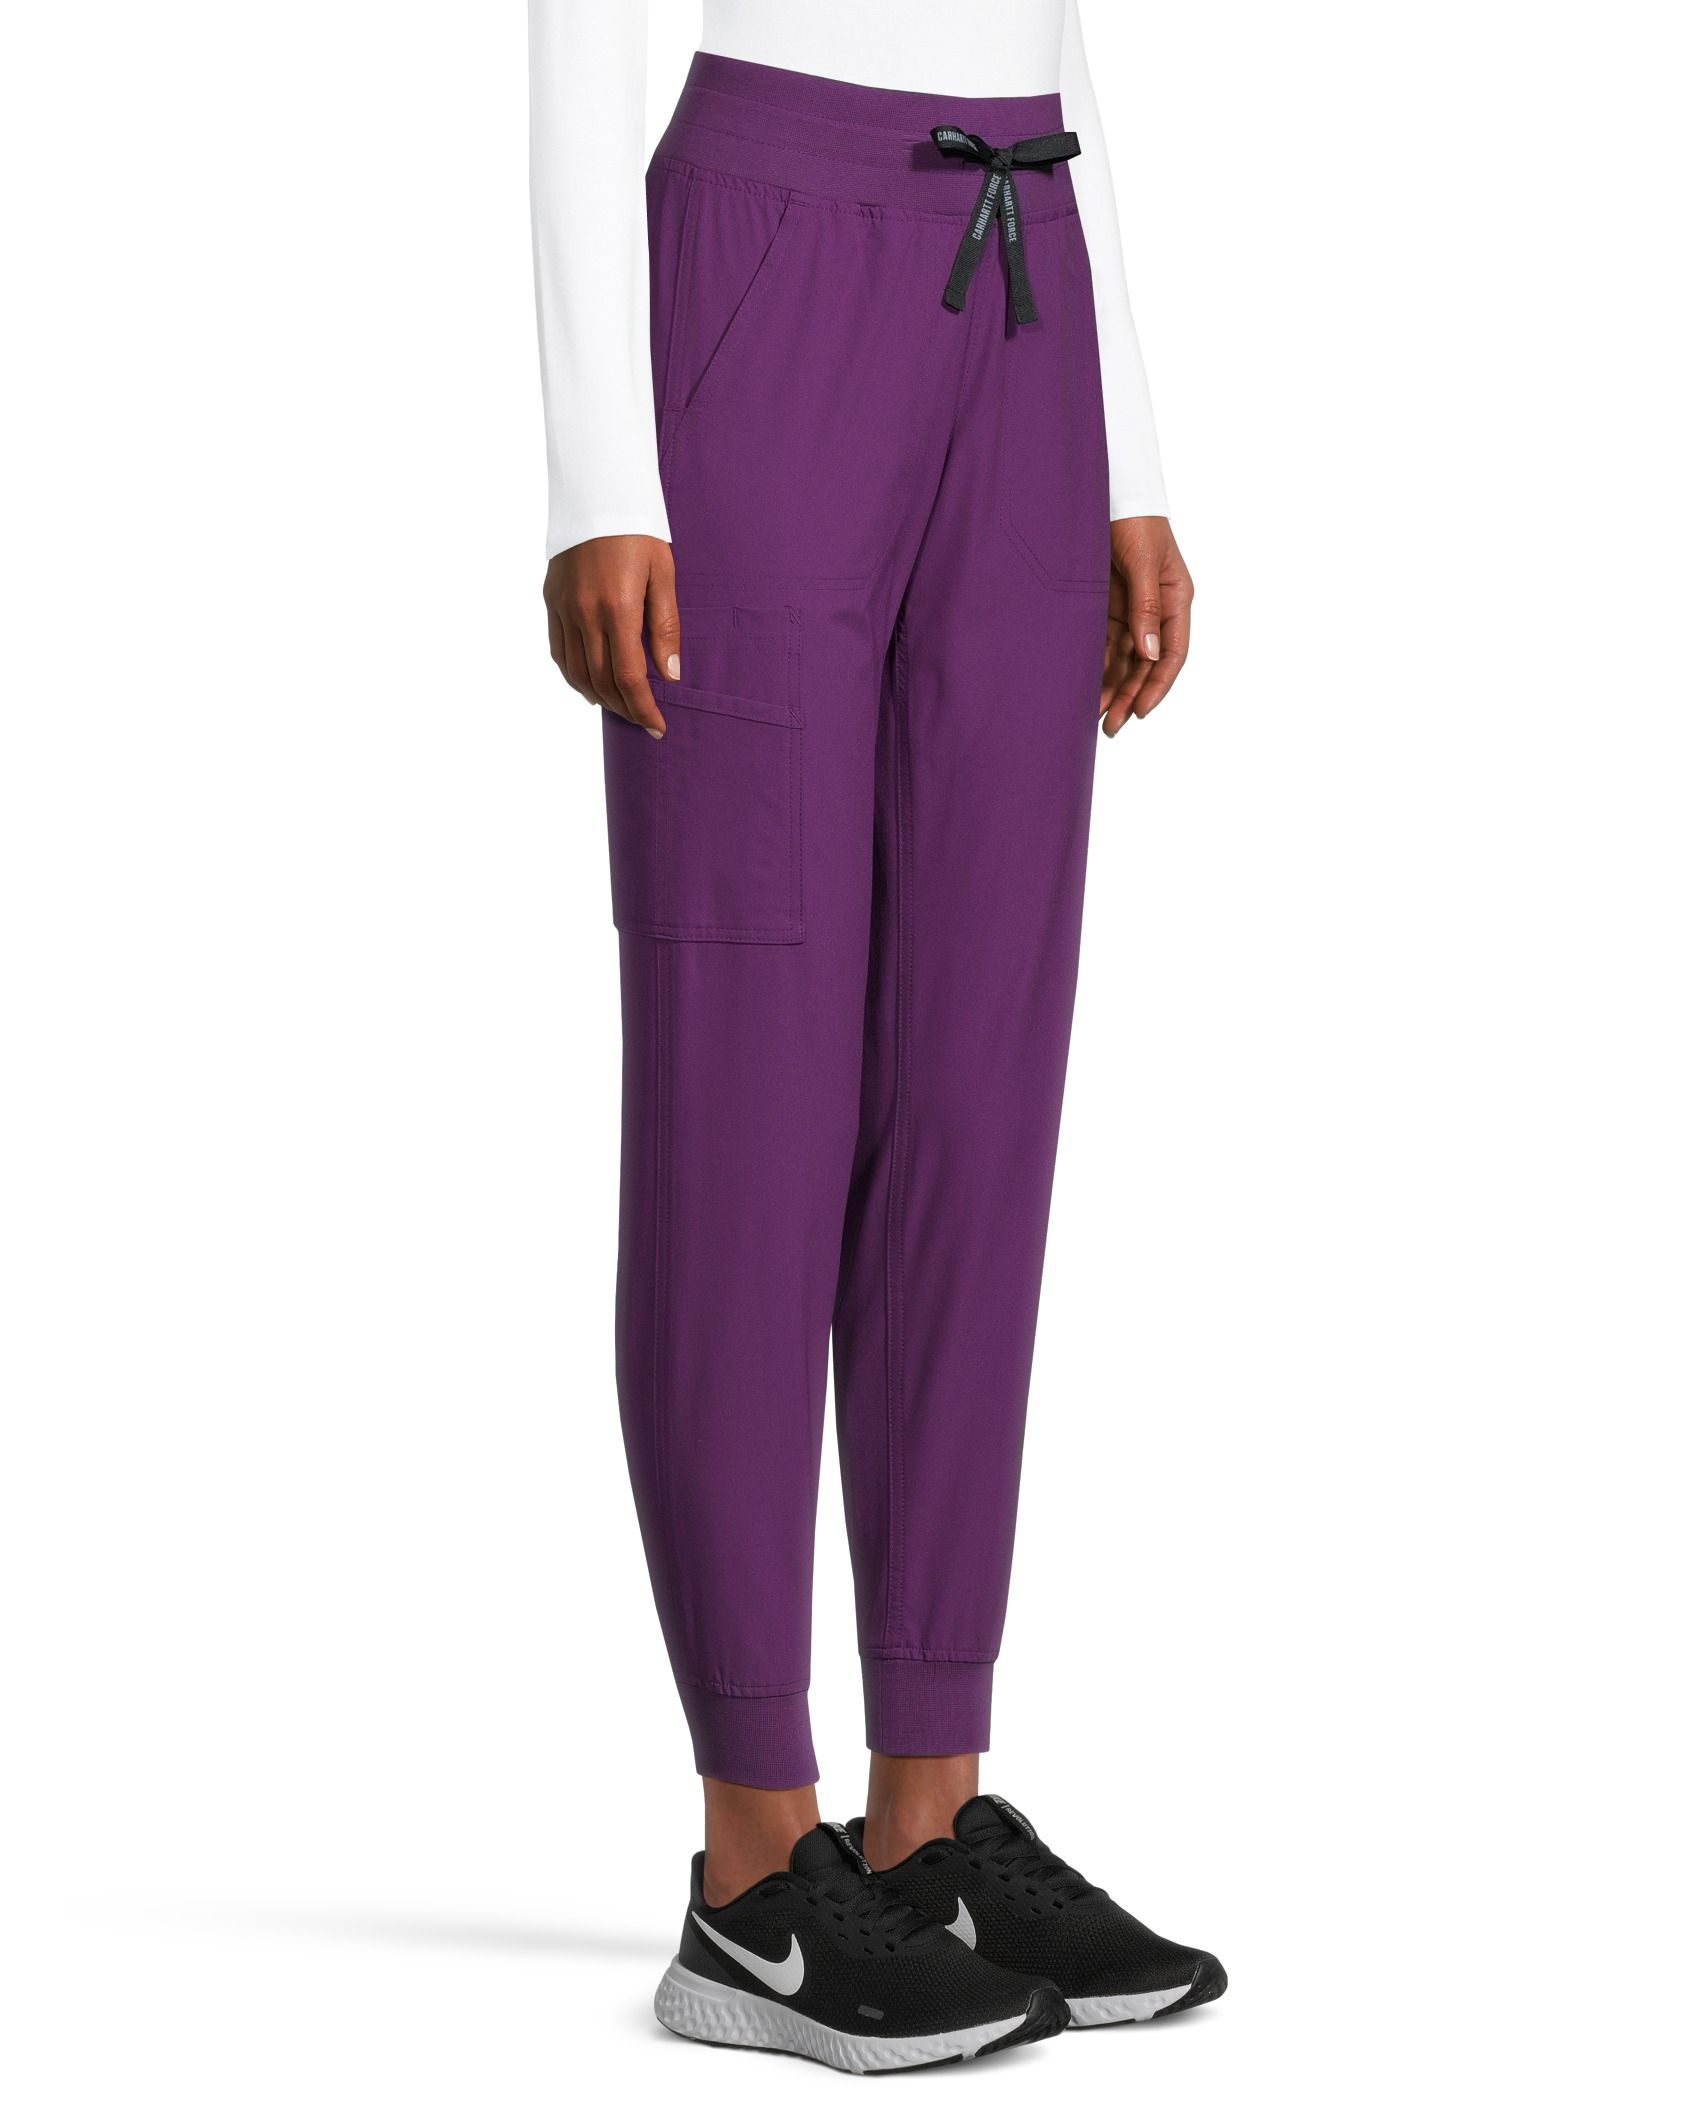 Girls' Woven Cargo Pants - All in Motion Purple XL 1 ct